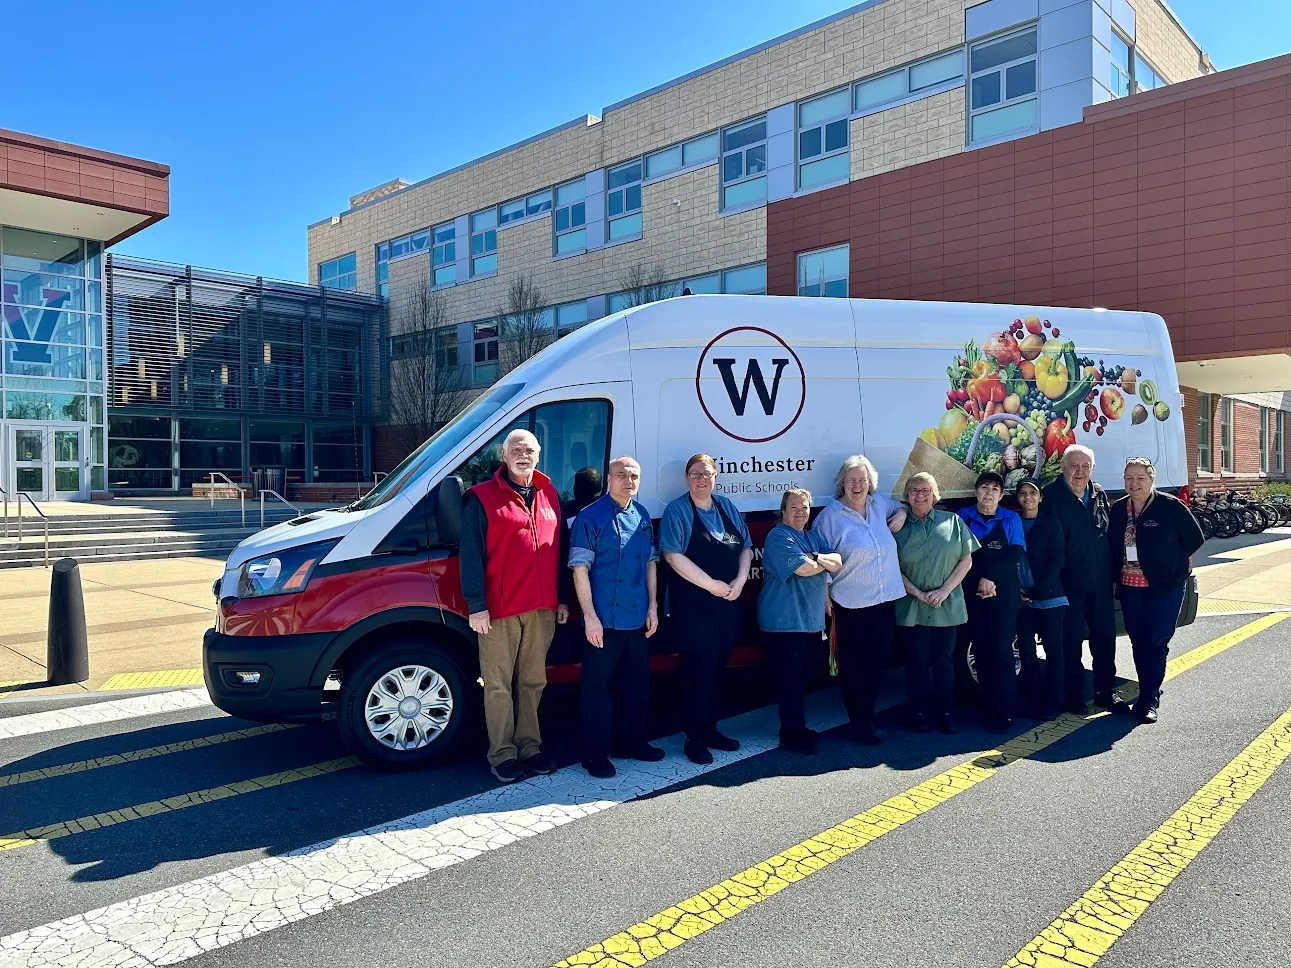 Schools invest in sustainability with new electric vehicle for nutrition services deliveries